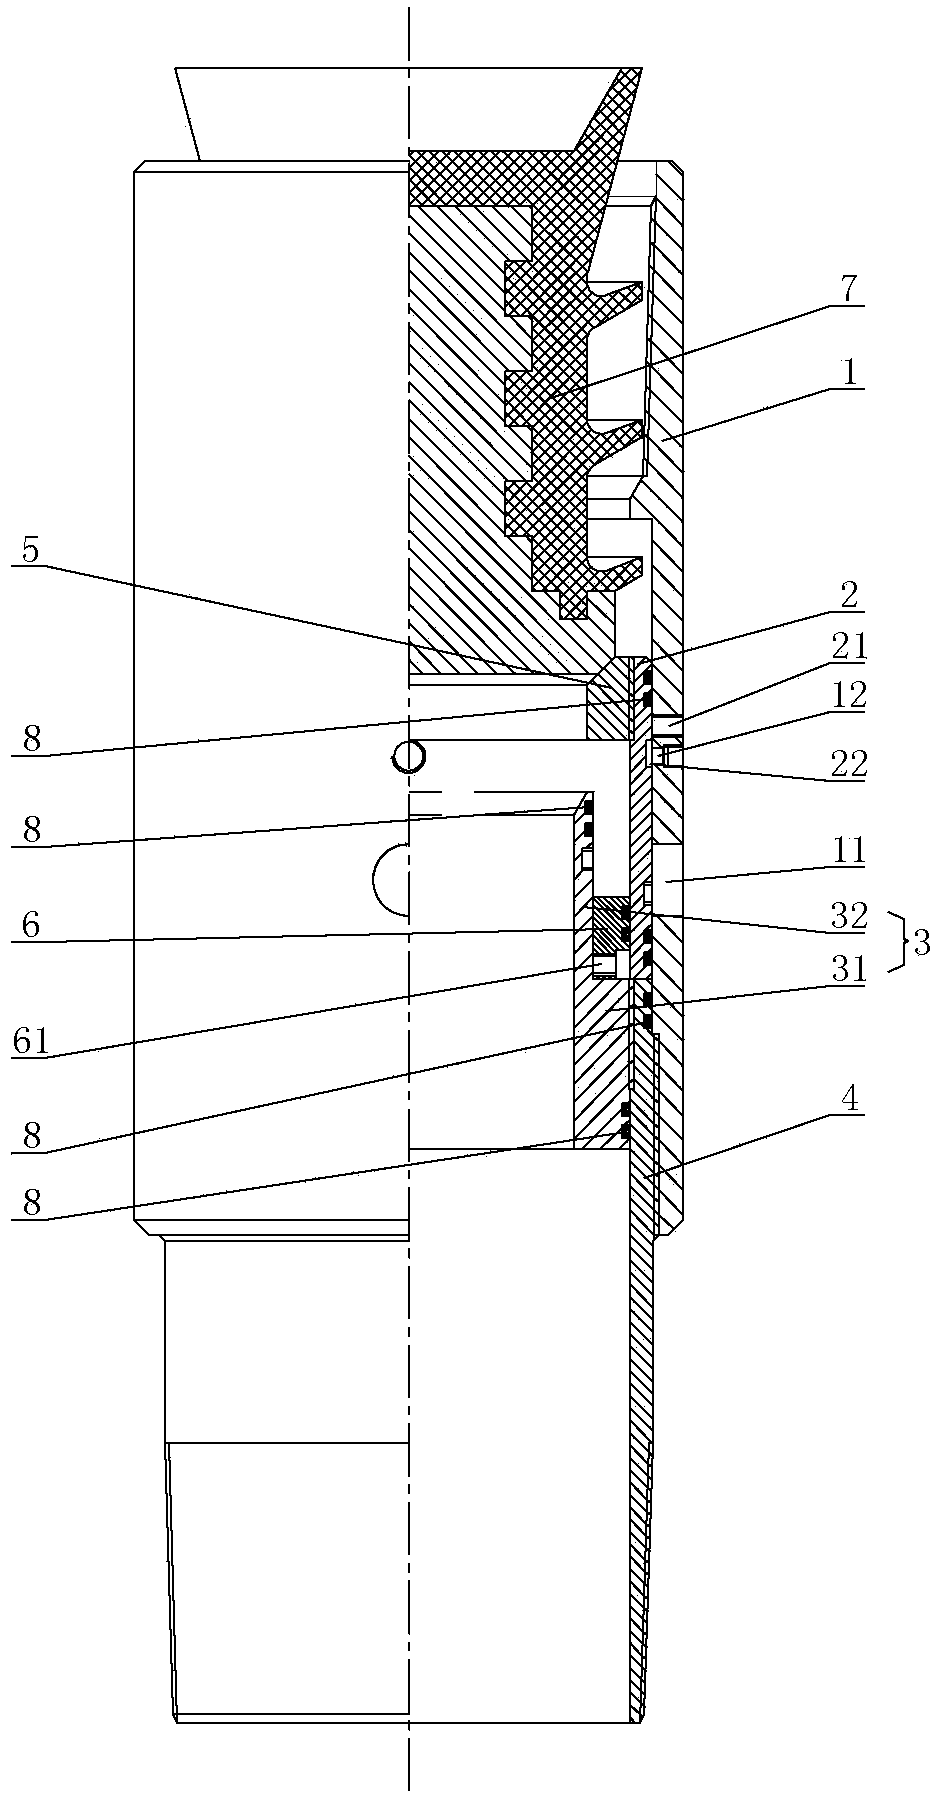 Grading cement pouring device